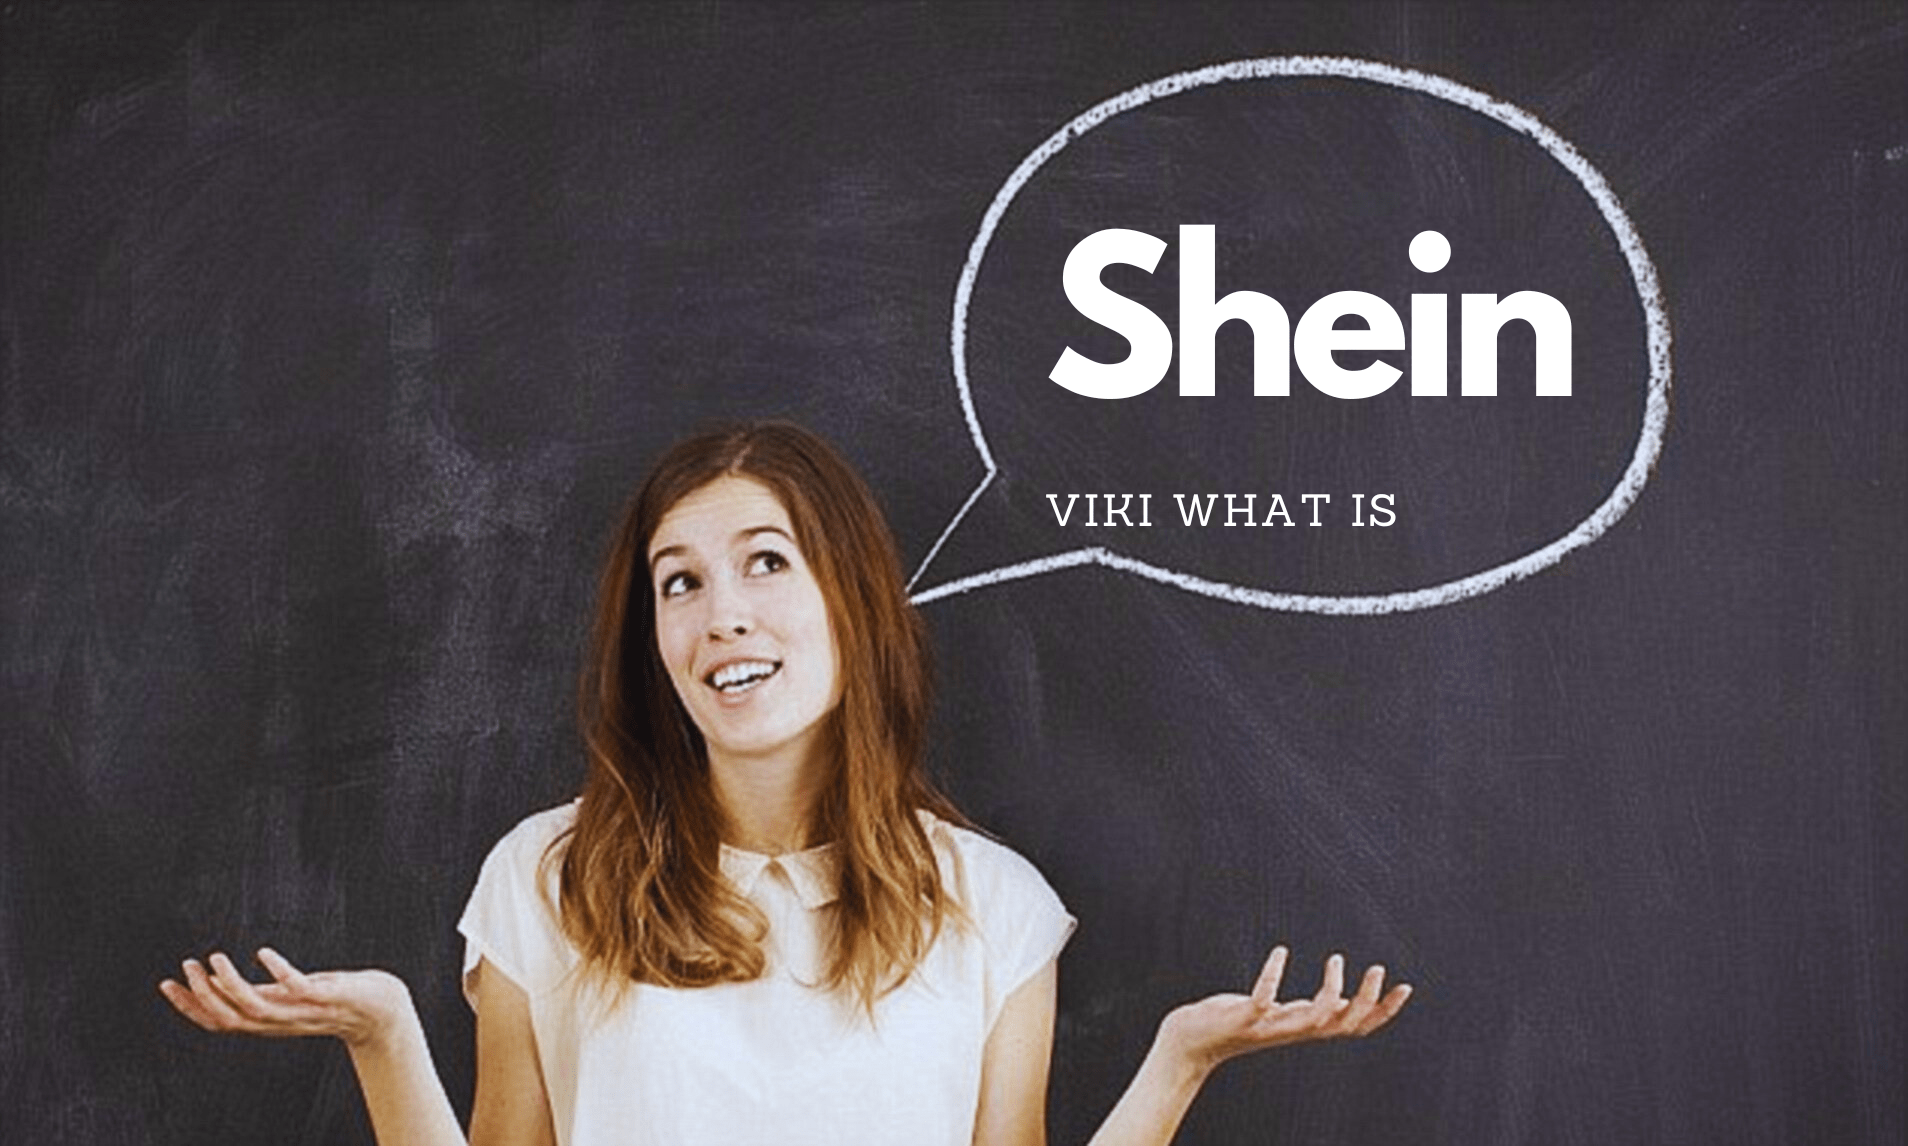 How to Pronounce Shein